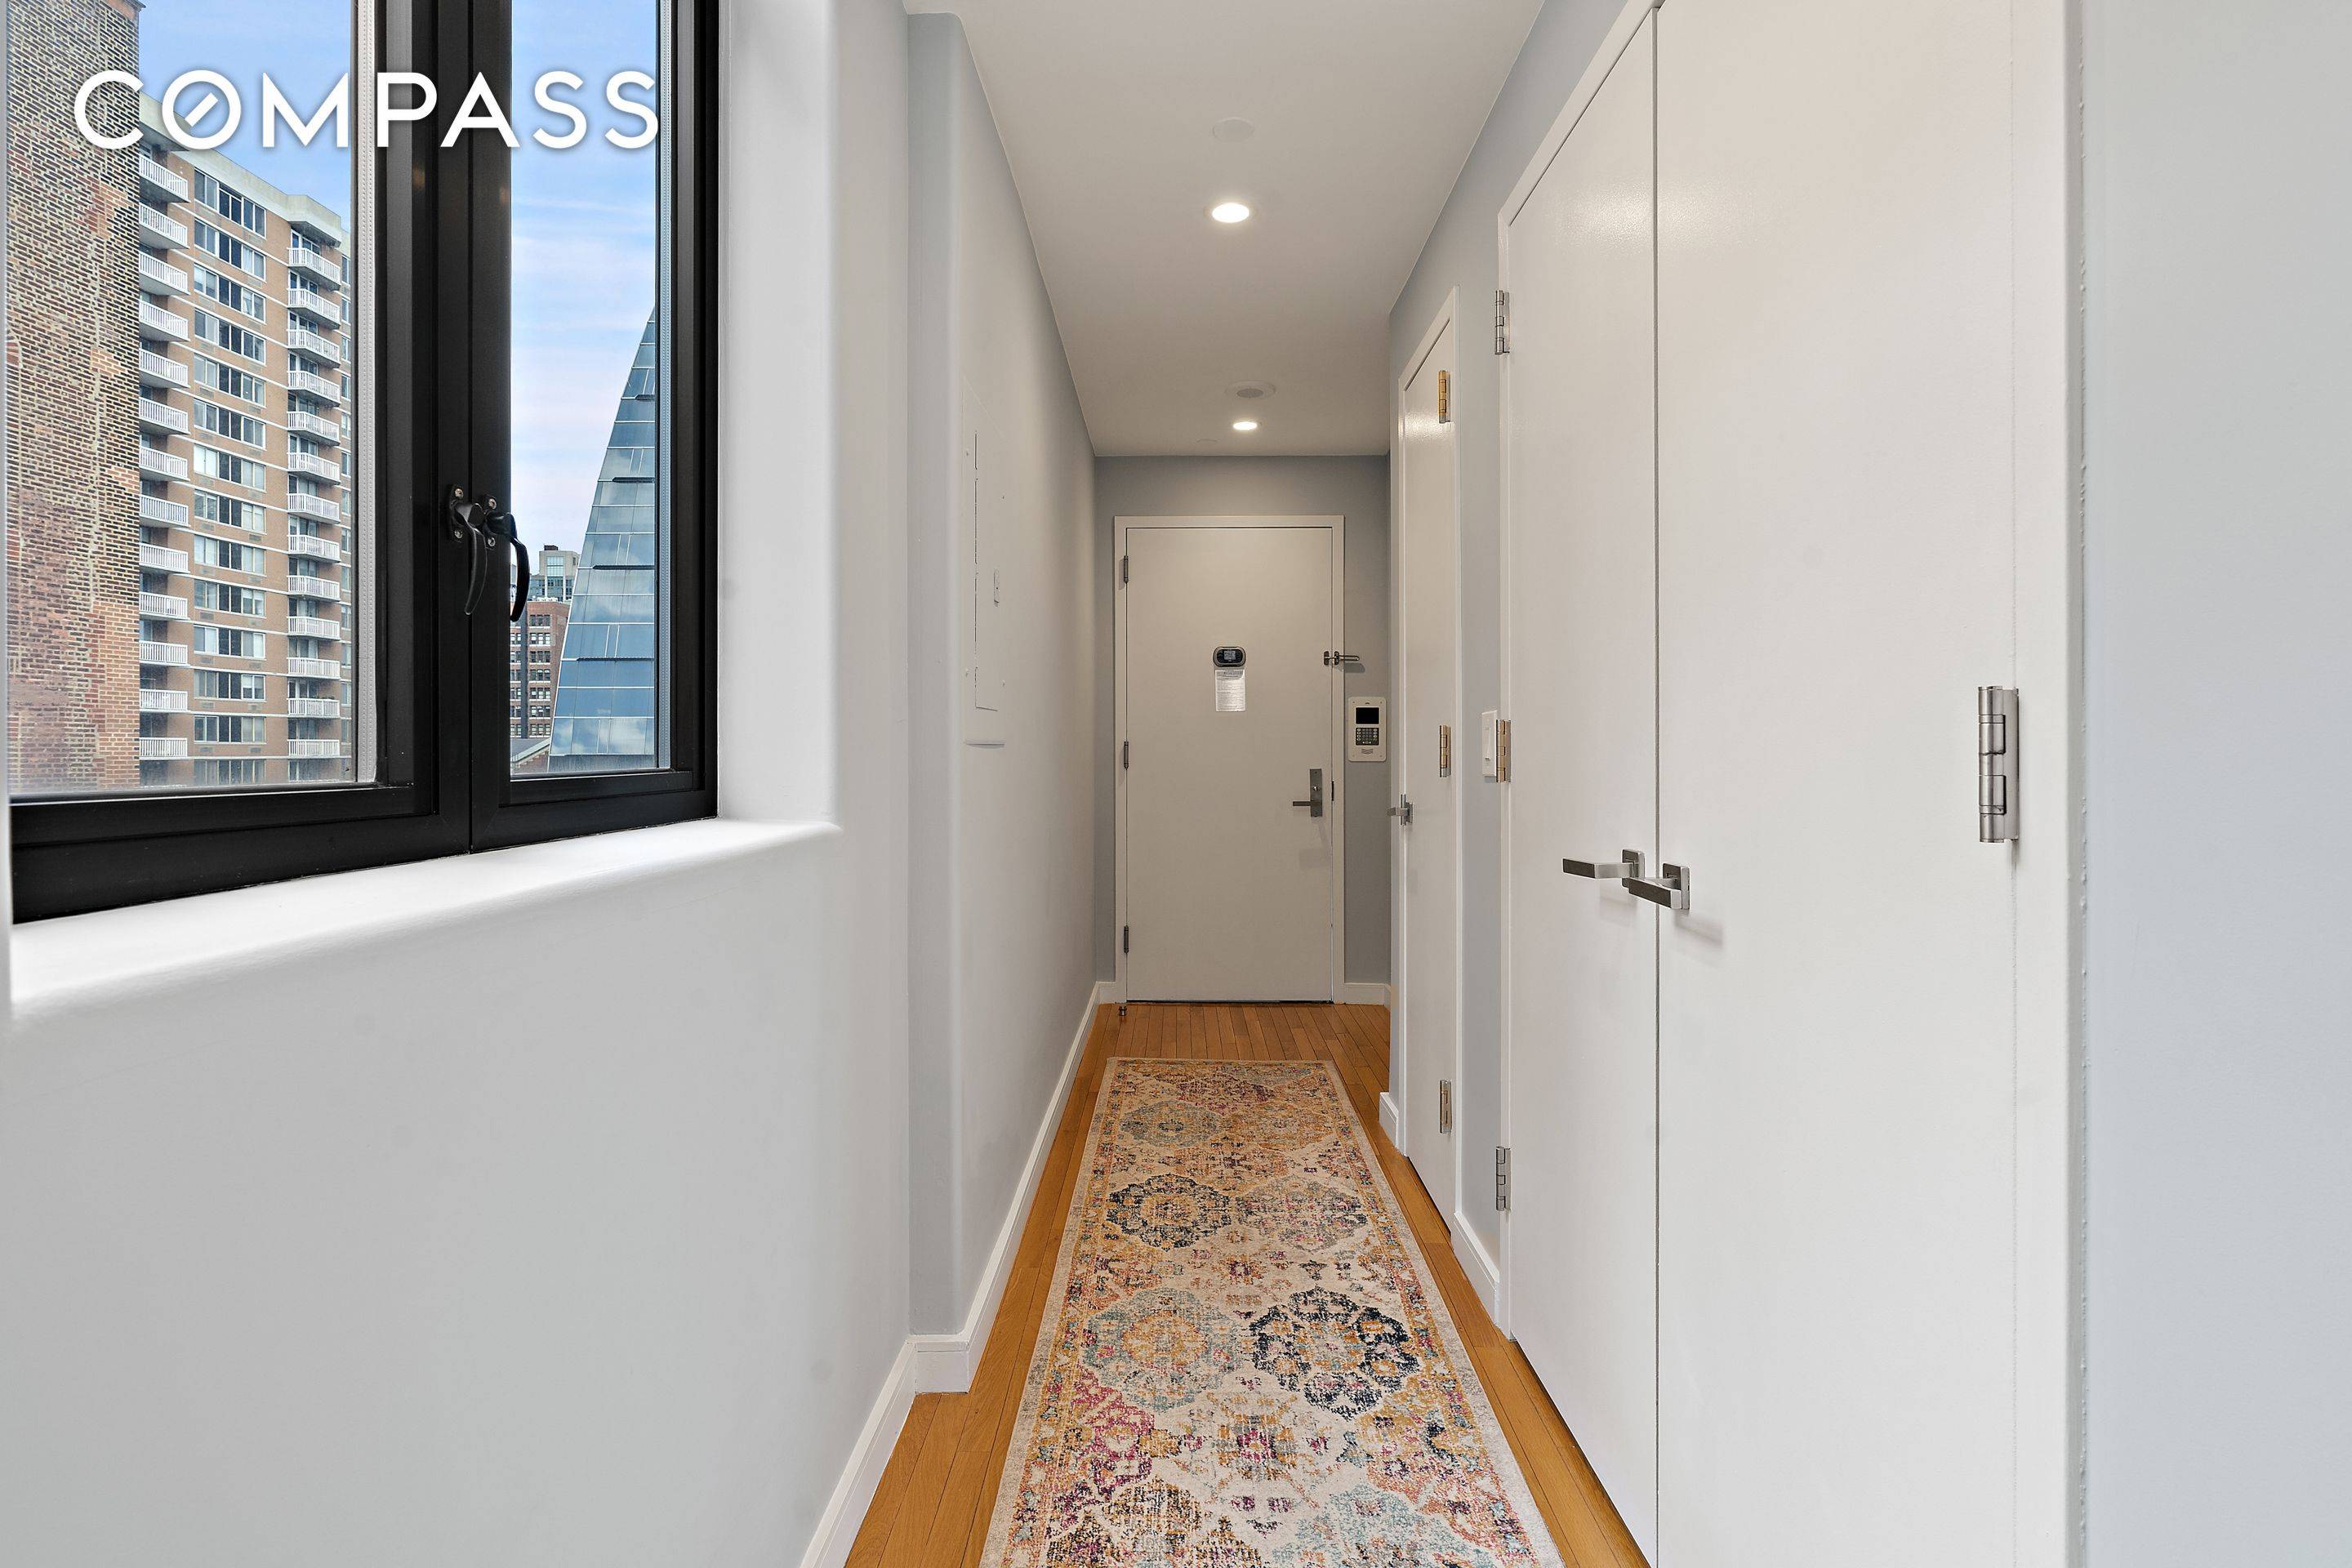 Back on the market ! Welcome to apartment 14C, a spacious corner one bed one bath home located at the crossroads of Gramercy, Flatiron and Kips Bay.